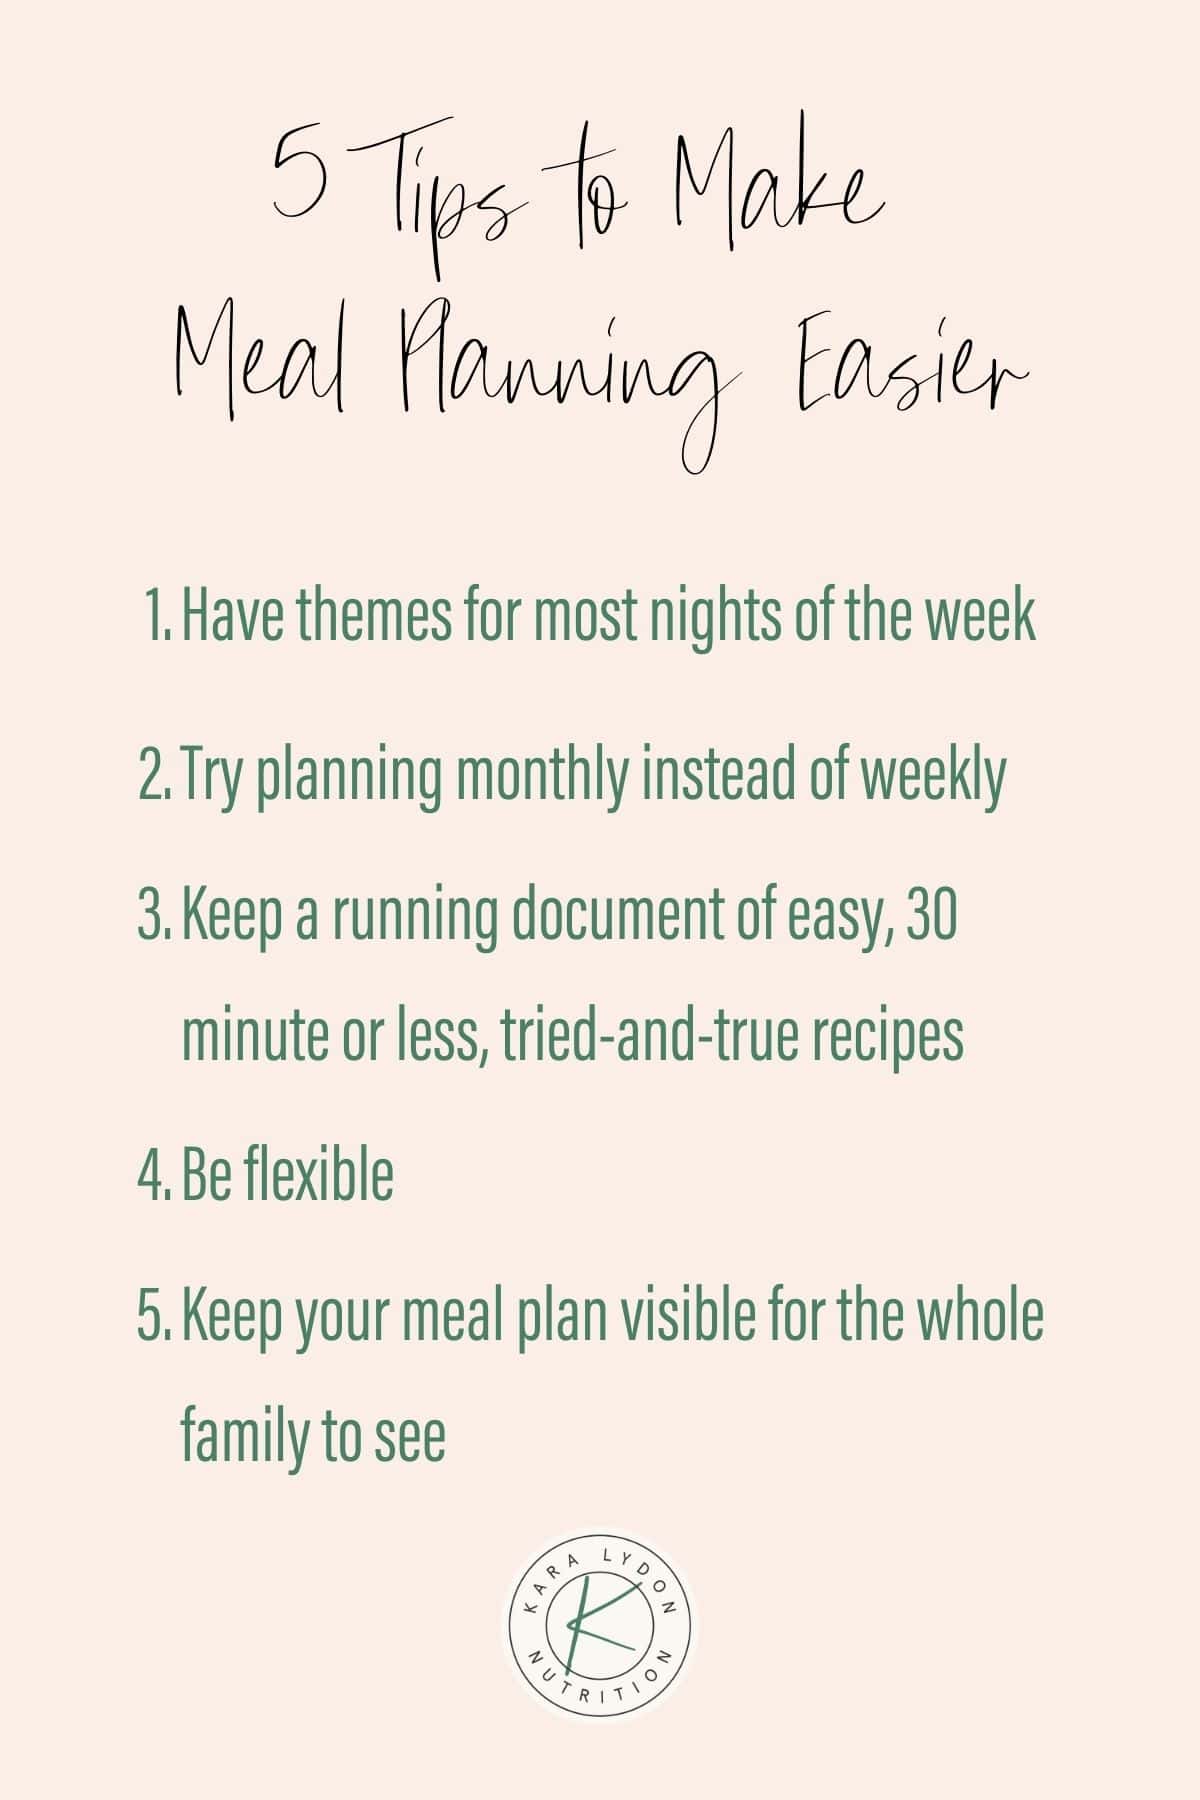 pink graphic with list 1-5 of tips to make meal planning easier.